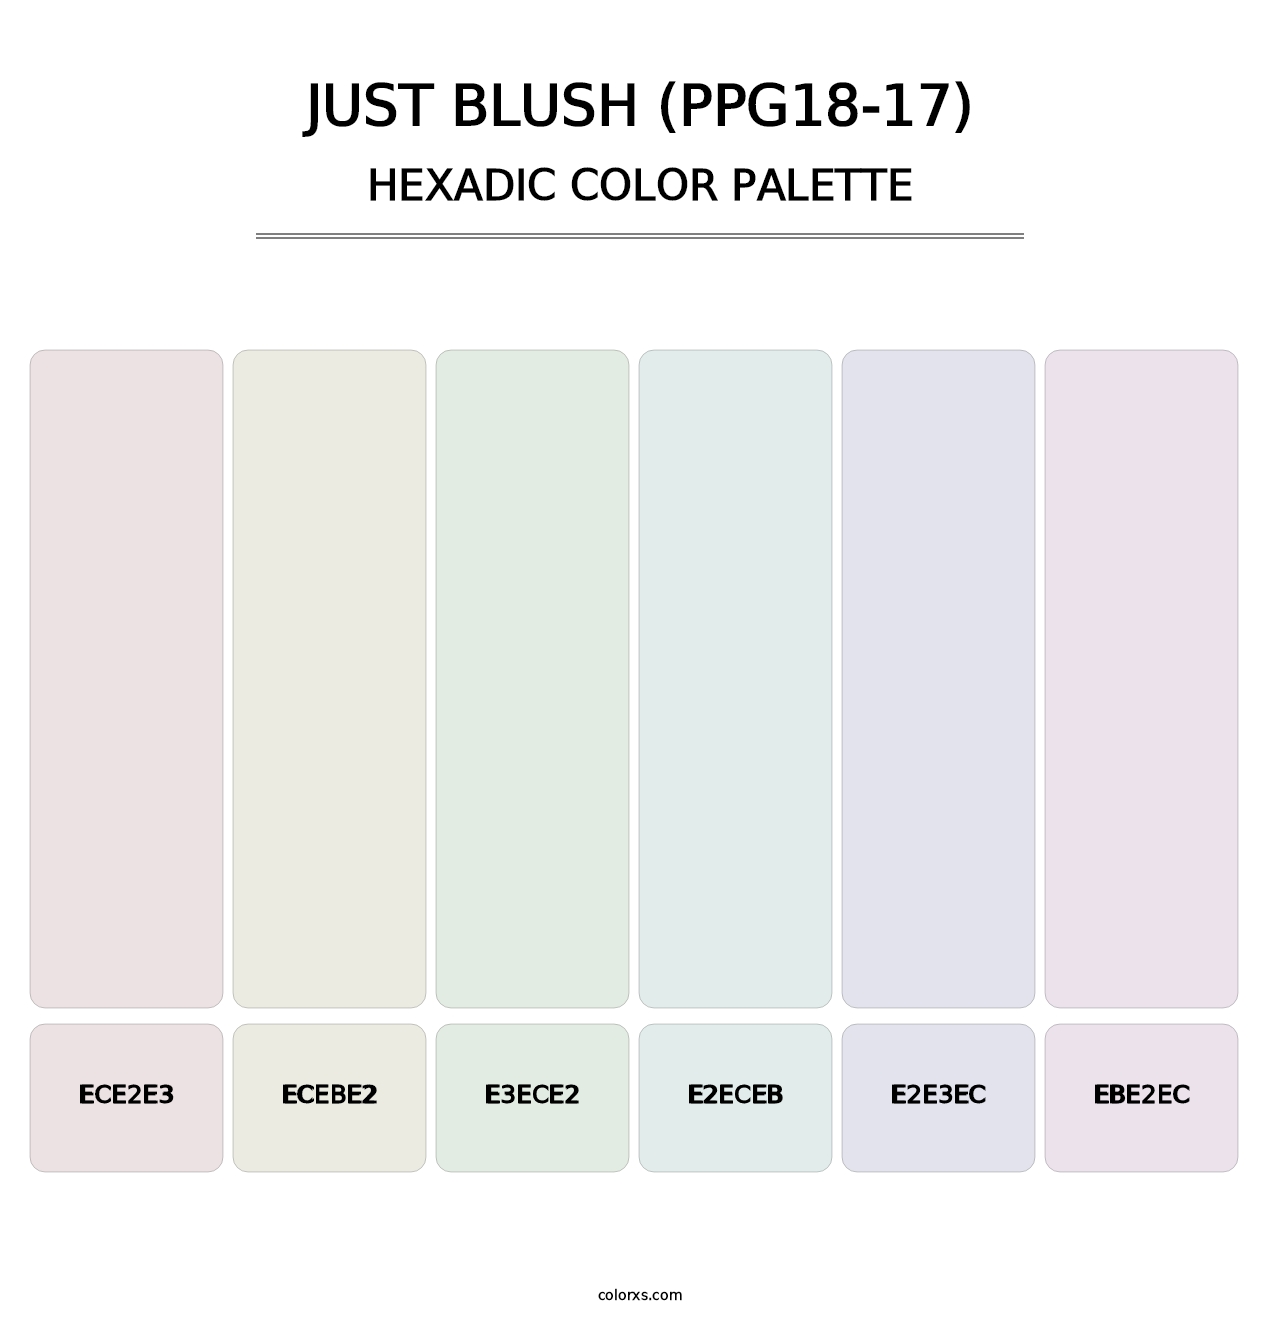 Just Blush (PPG18-17) - Hexadic Color Palette